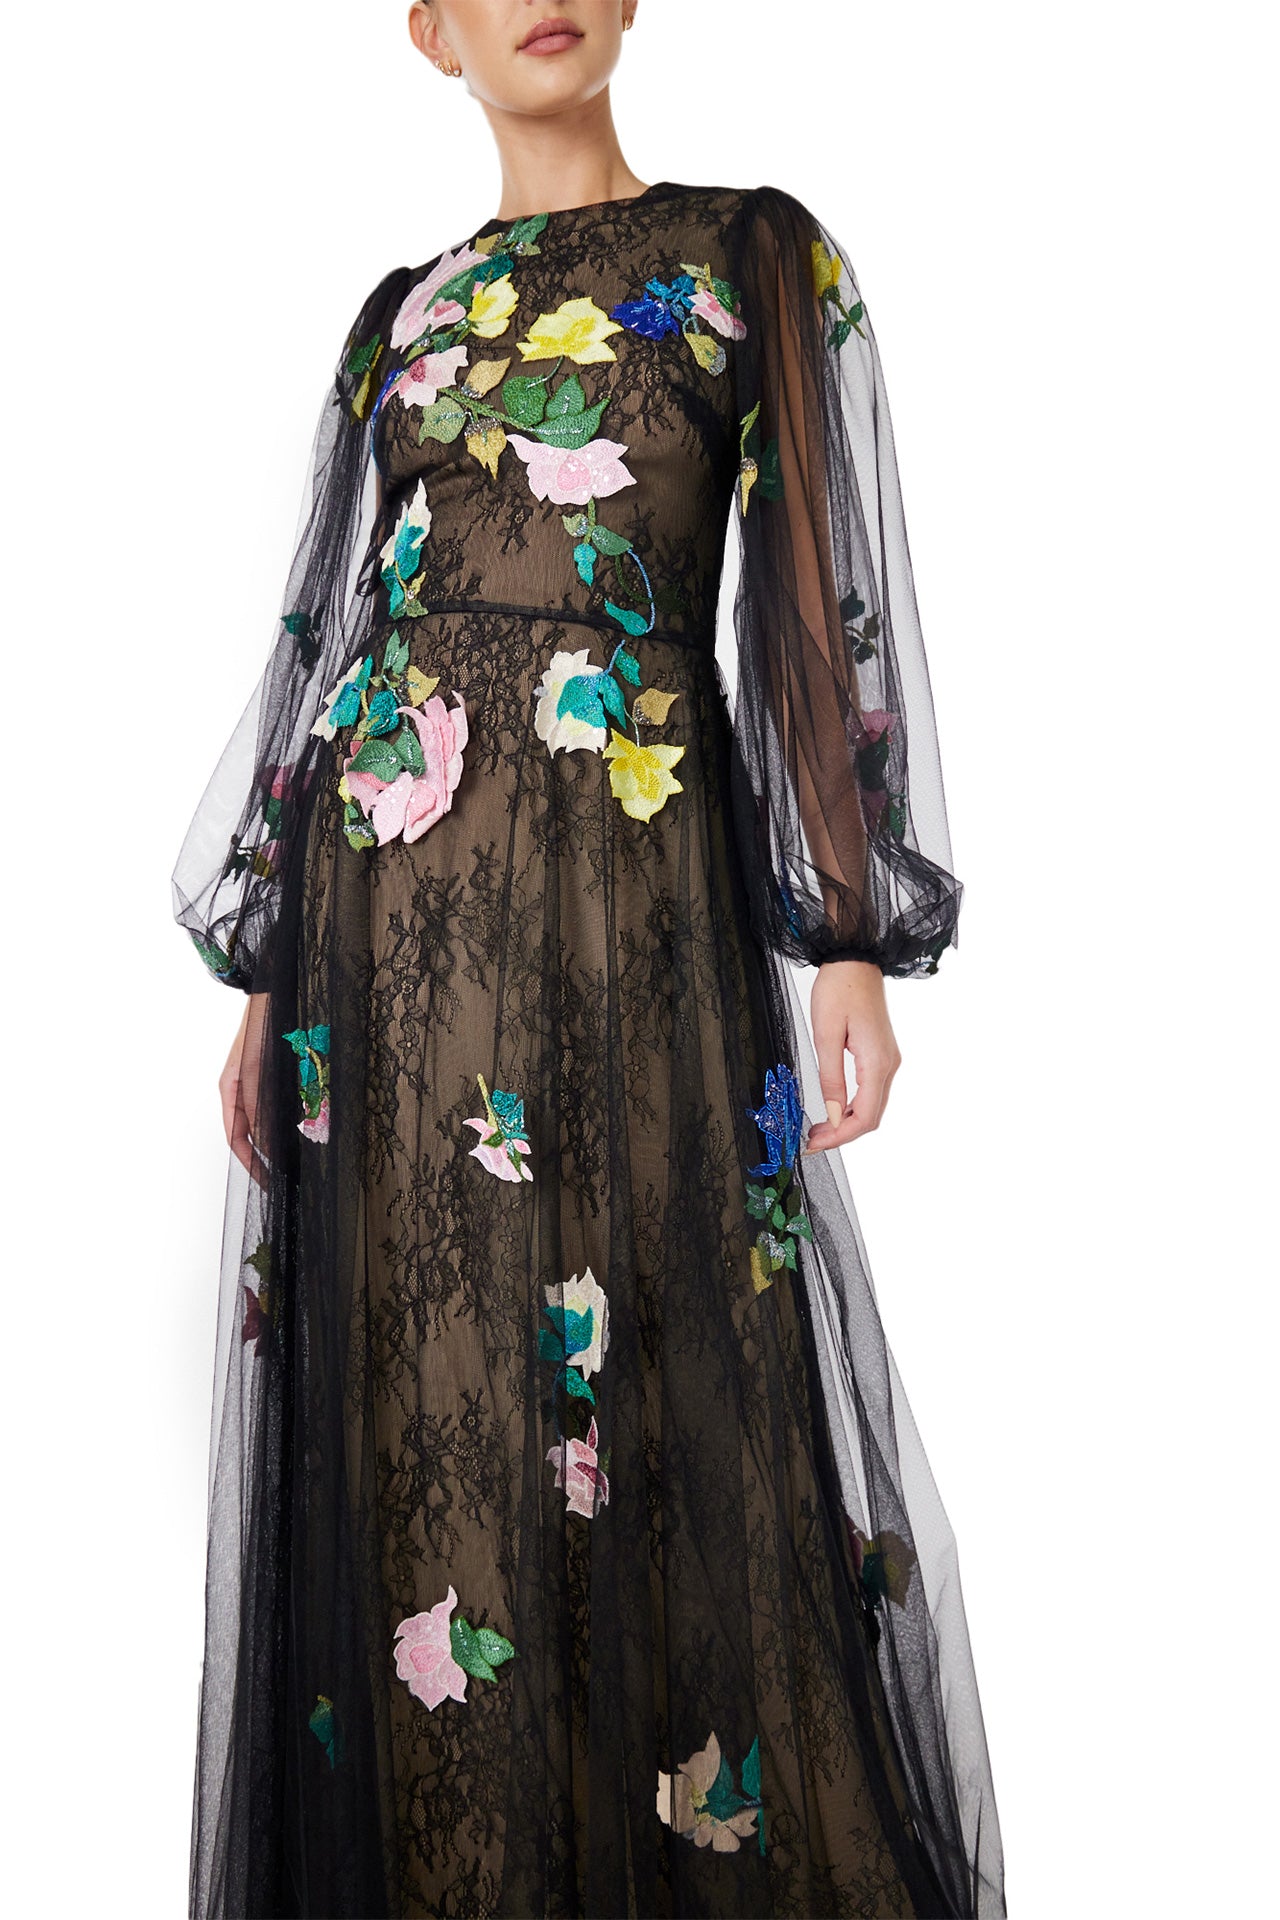 Monique Lhuillier Spring 2024 jewel neck, puff sleeve gown with sheer sleeves and floral embroidery over a lace underlay in black tulle - front closeup.